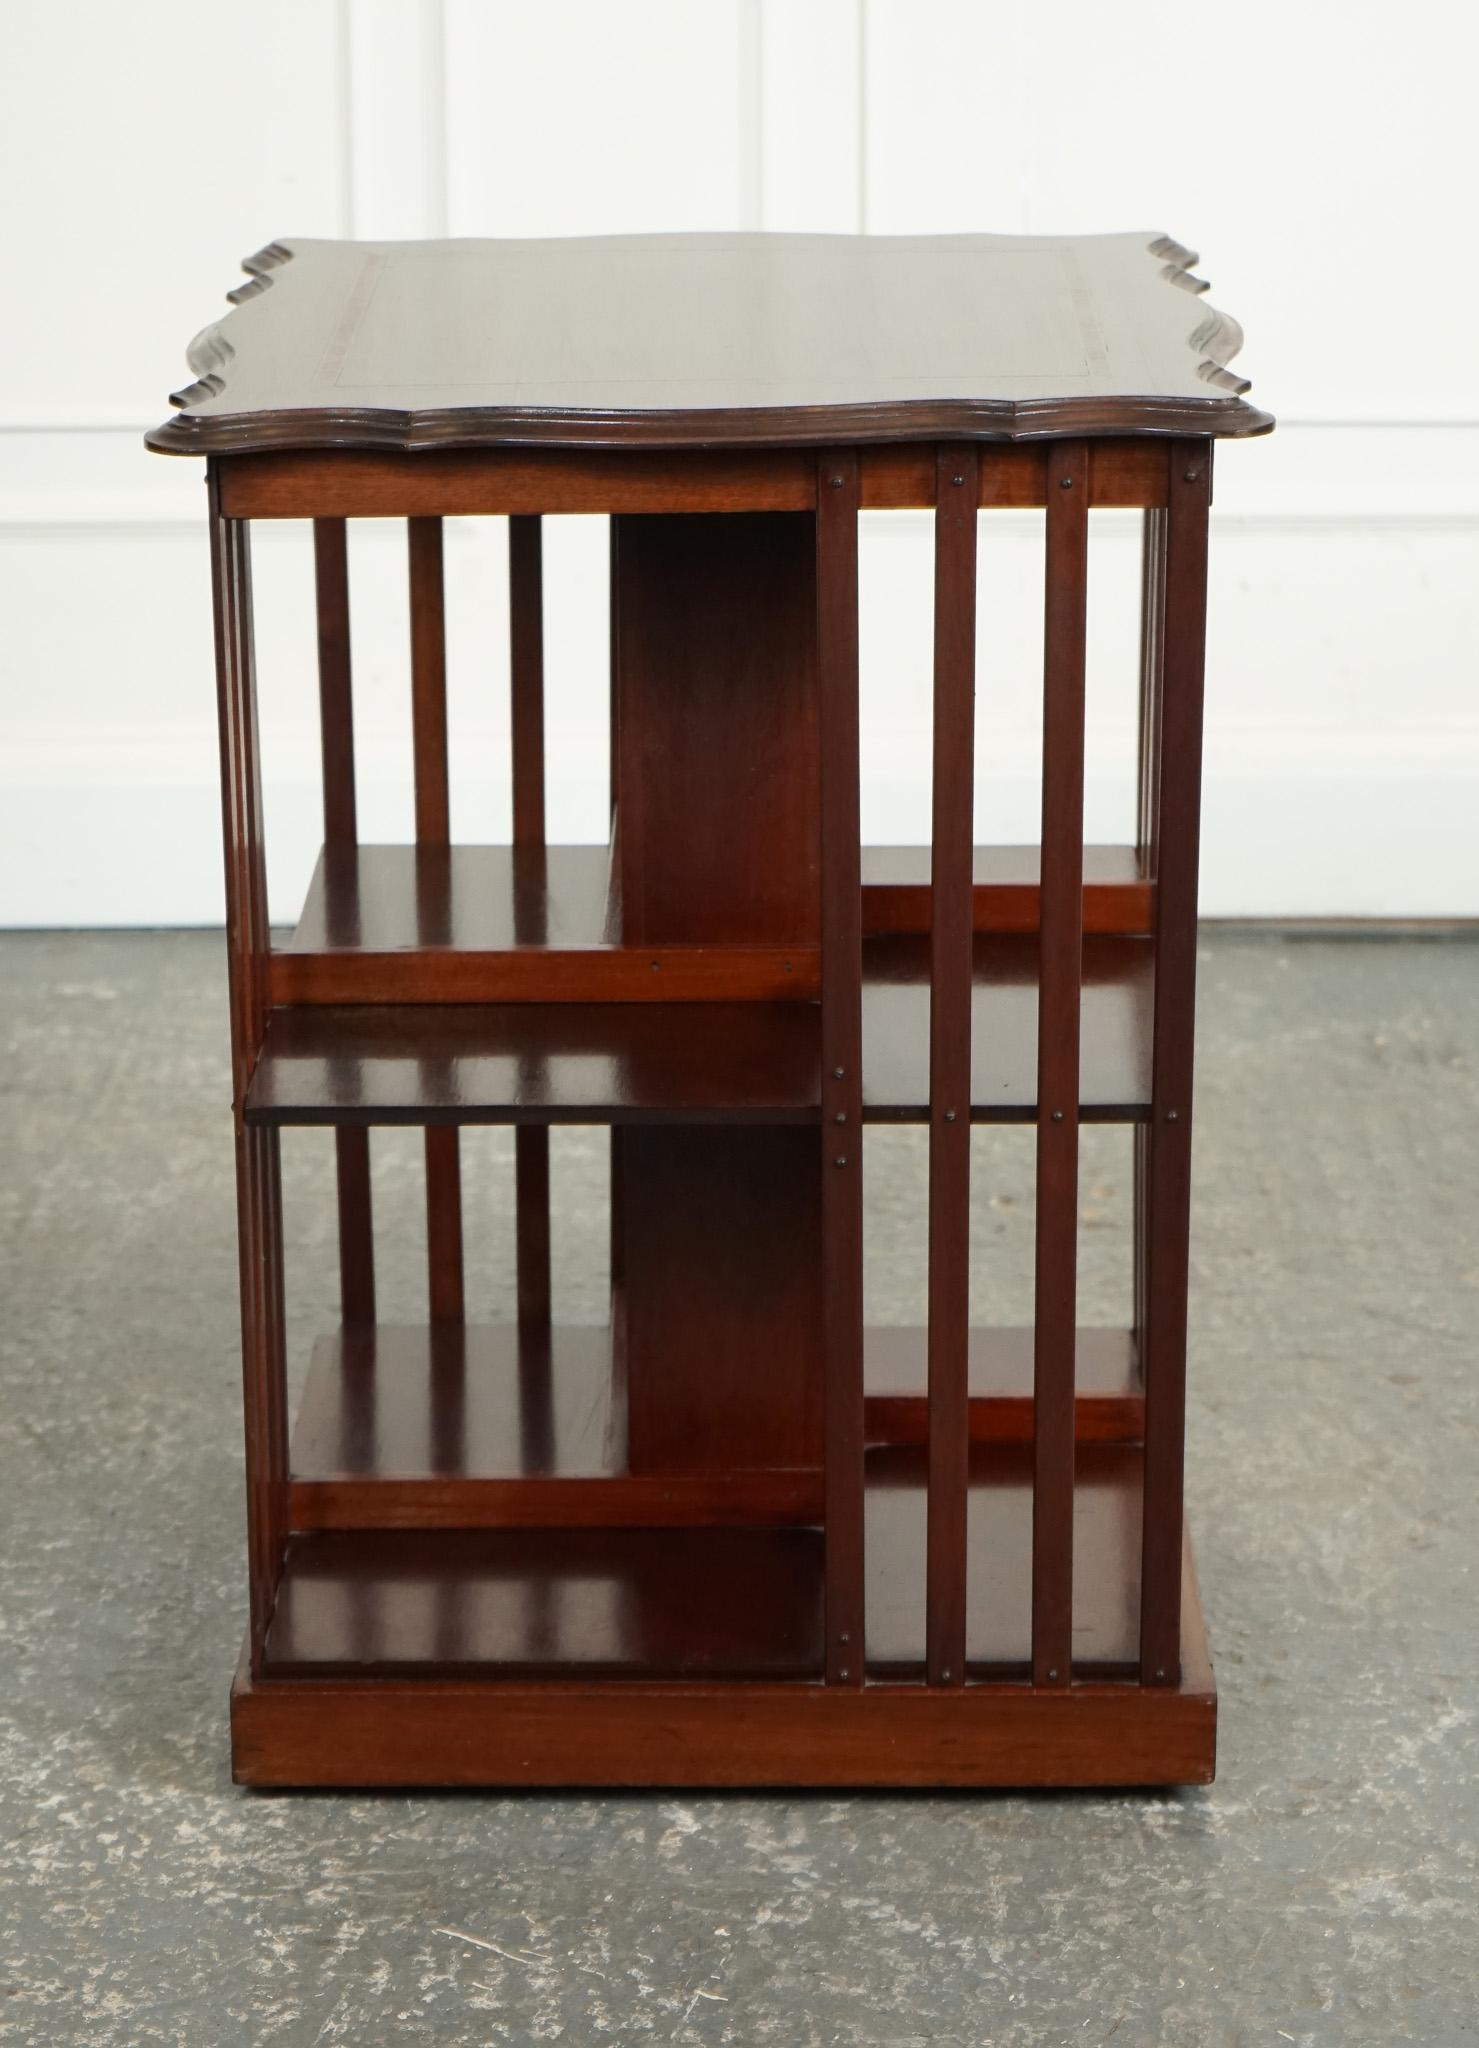 
We are delighted to offer for sale this Edwardian Revolving Bookcase.

The Antique Edwardian Revolving Bookcase with a Serpentine Shaped Top is a true gem from the past, embodying the elegance and craftsmanship of the Edwardian era. Crafted with